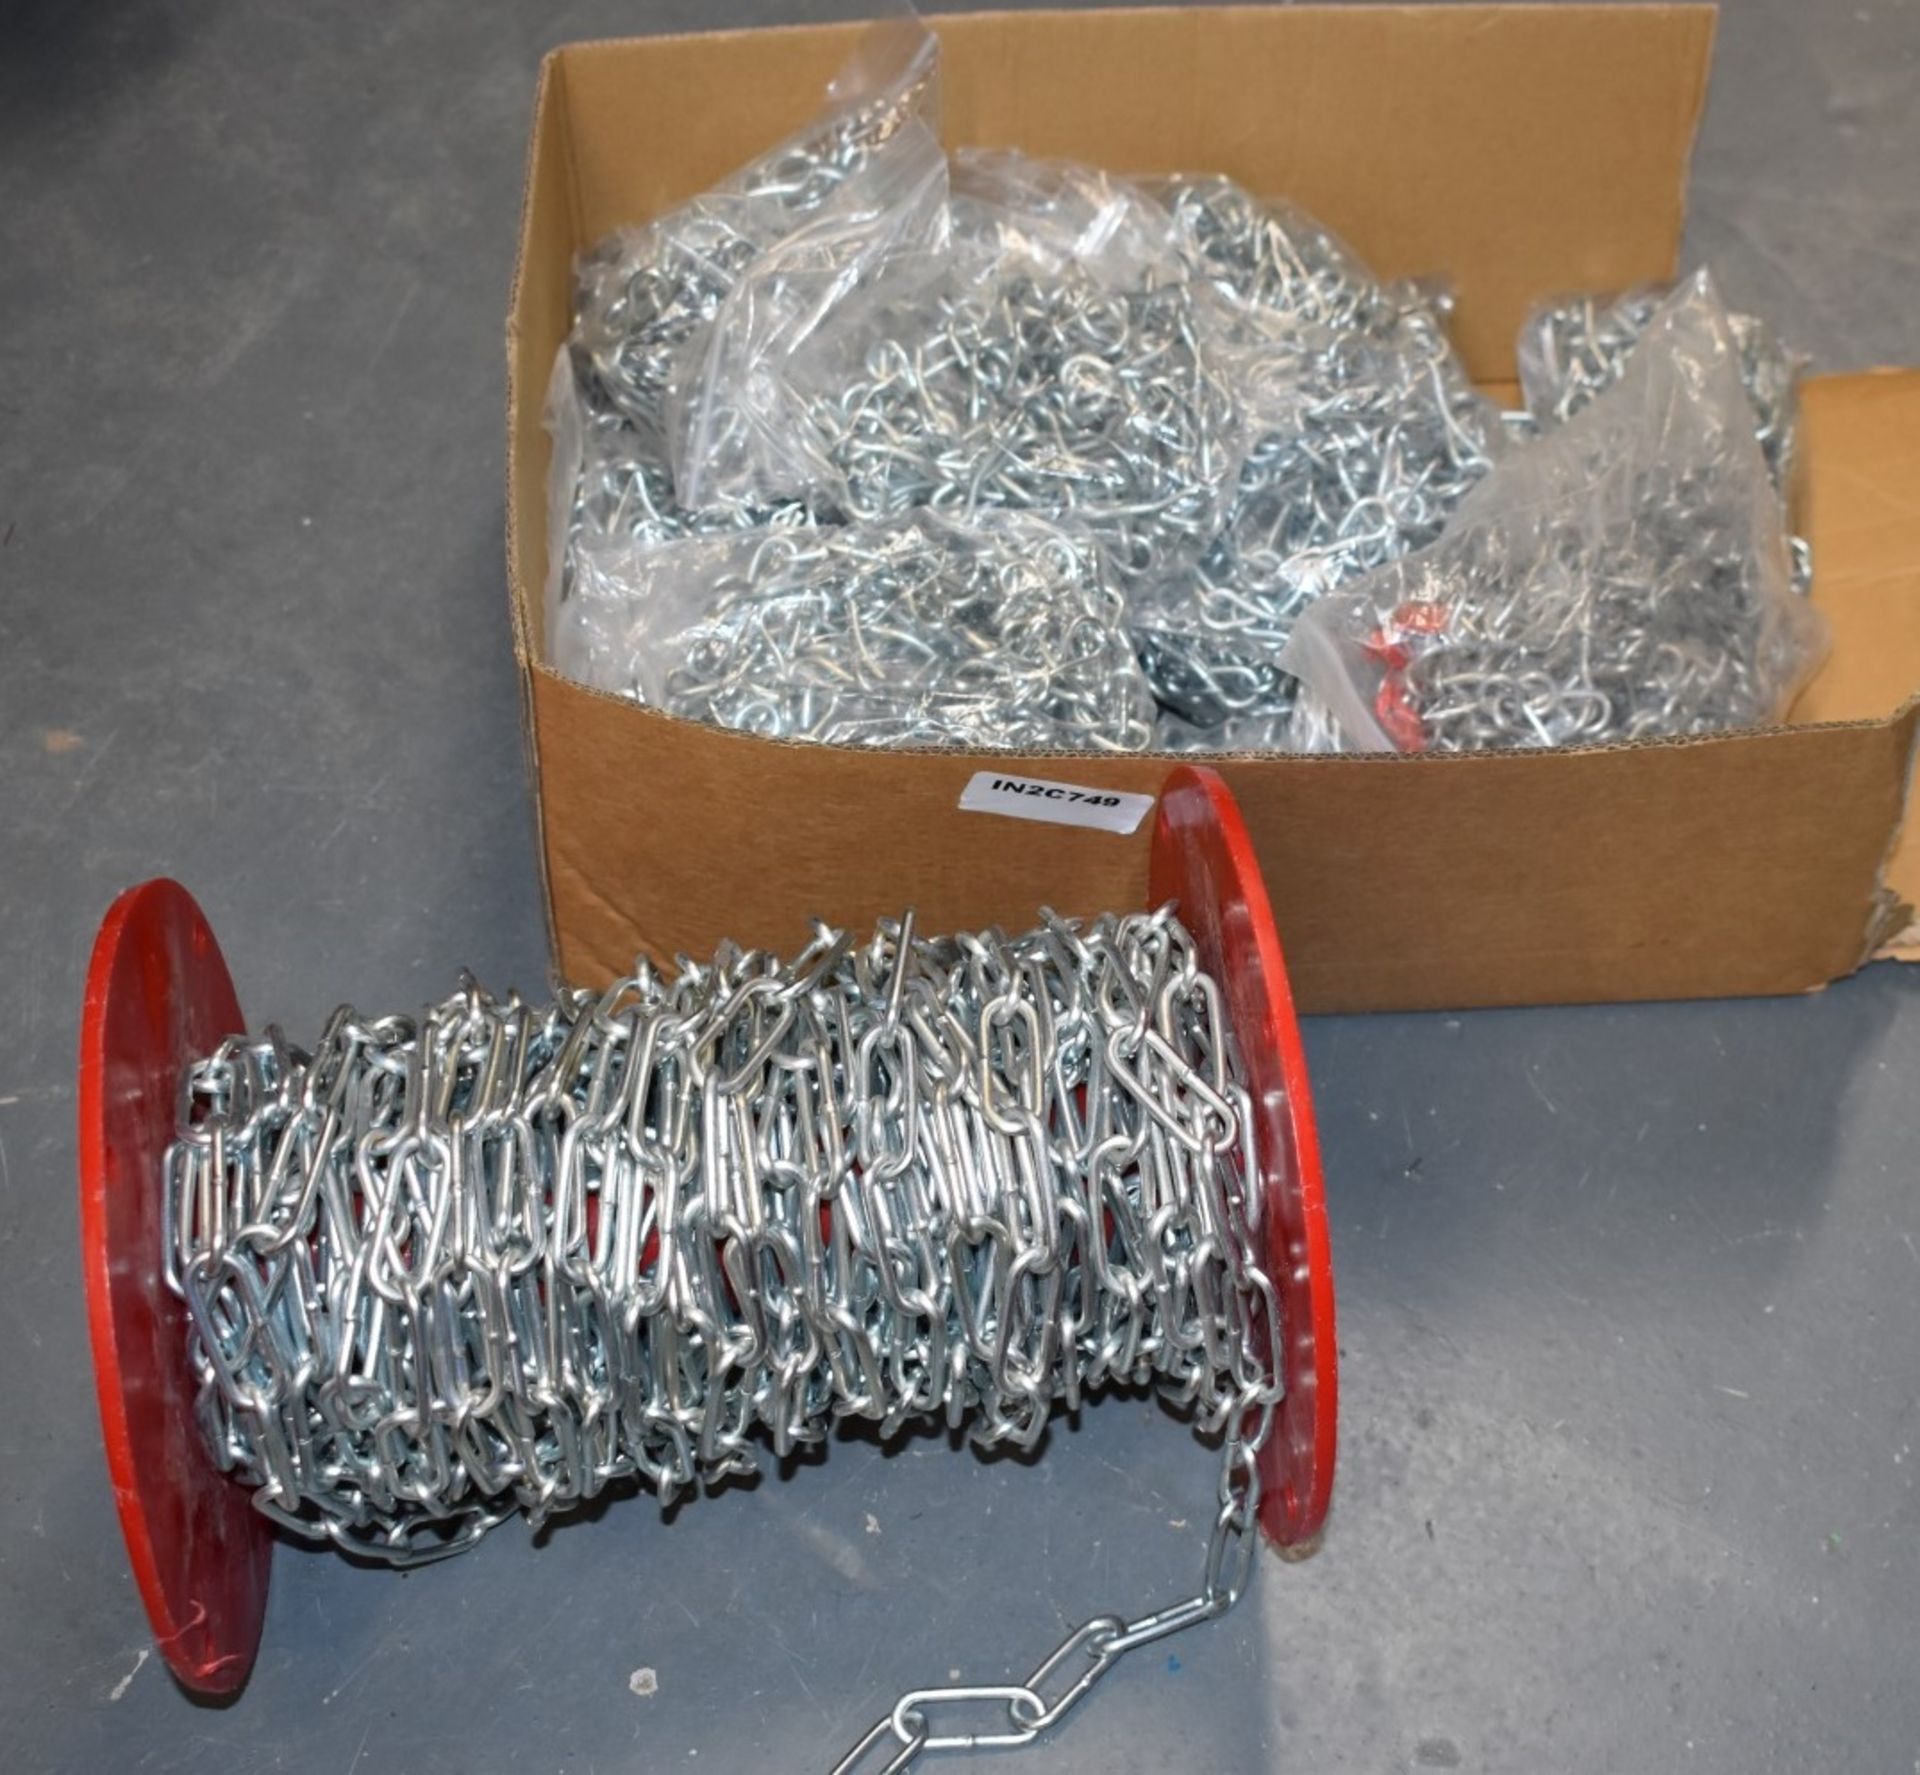 1 x Assorted Lot of Link Chain - Includes 175' Link Chain Reel, 20 Bags of Chain and Box of Chain - Image 7 of 9